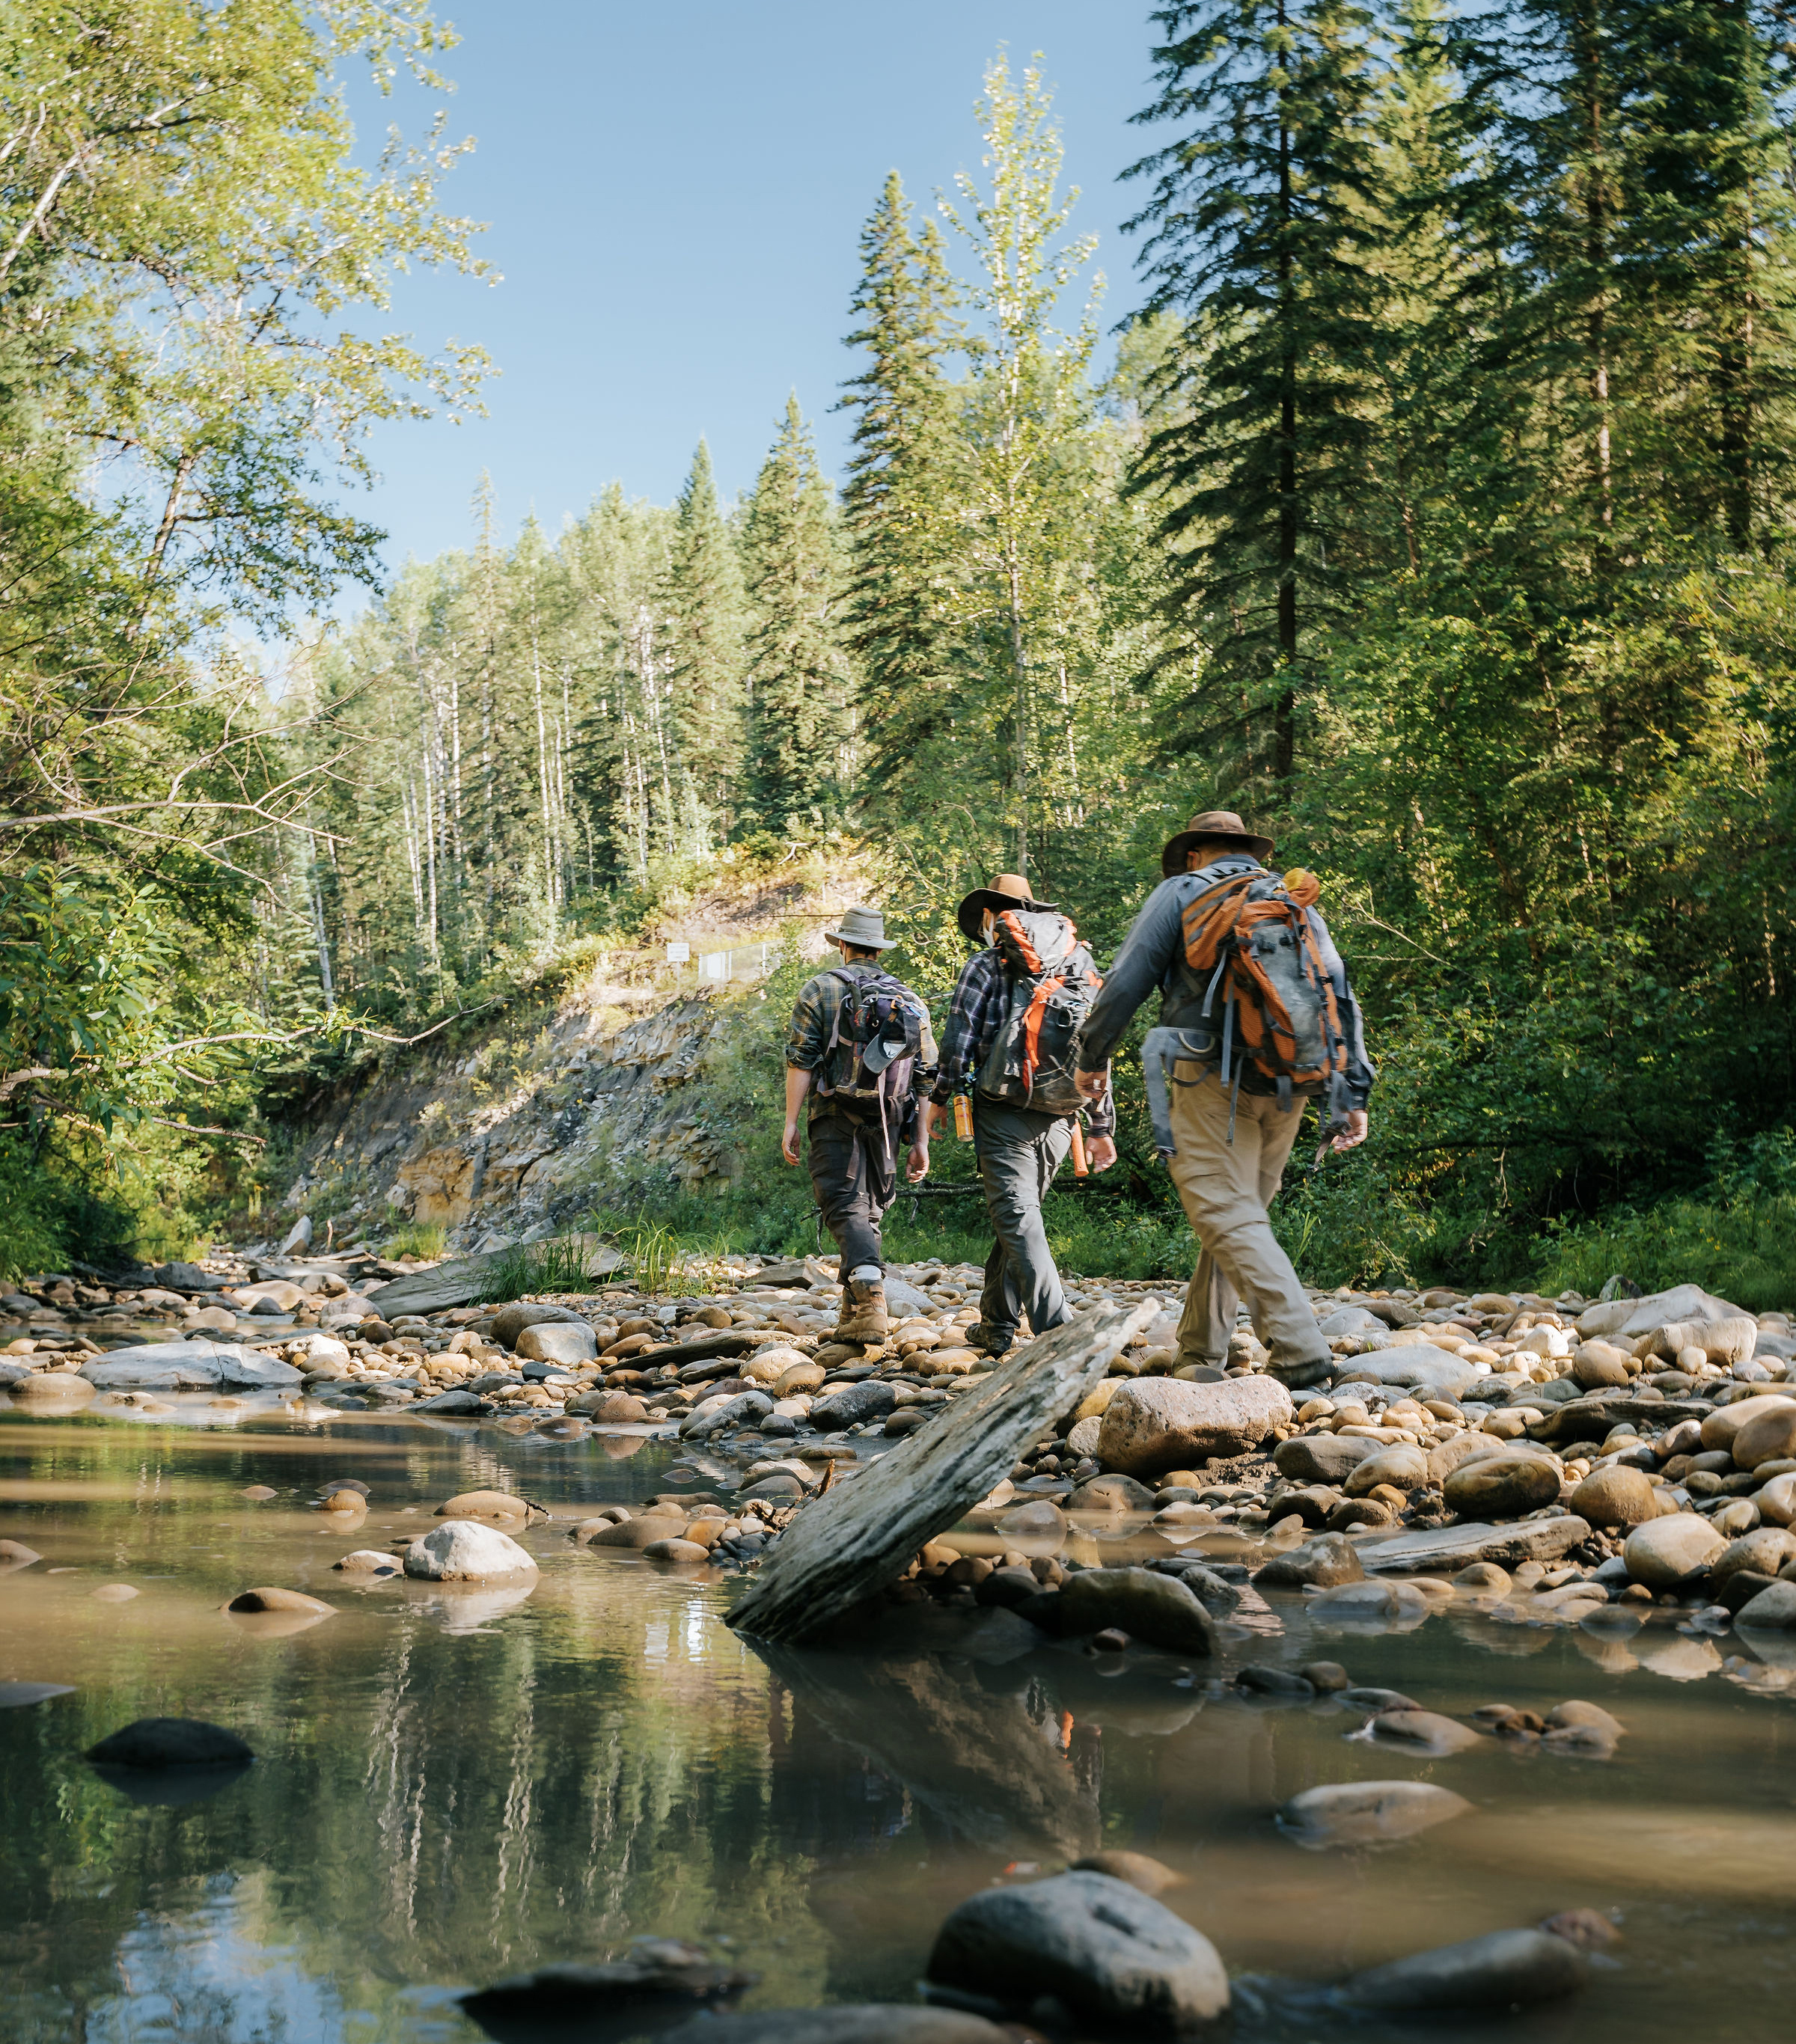 Three hikers walking on the rocky banks of a placid creek.